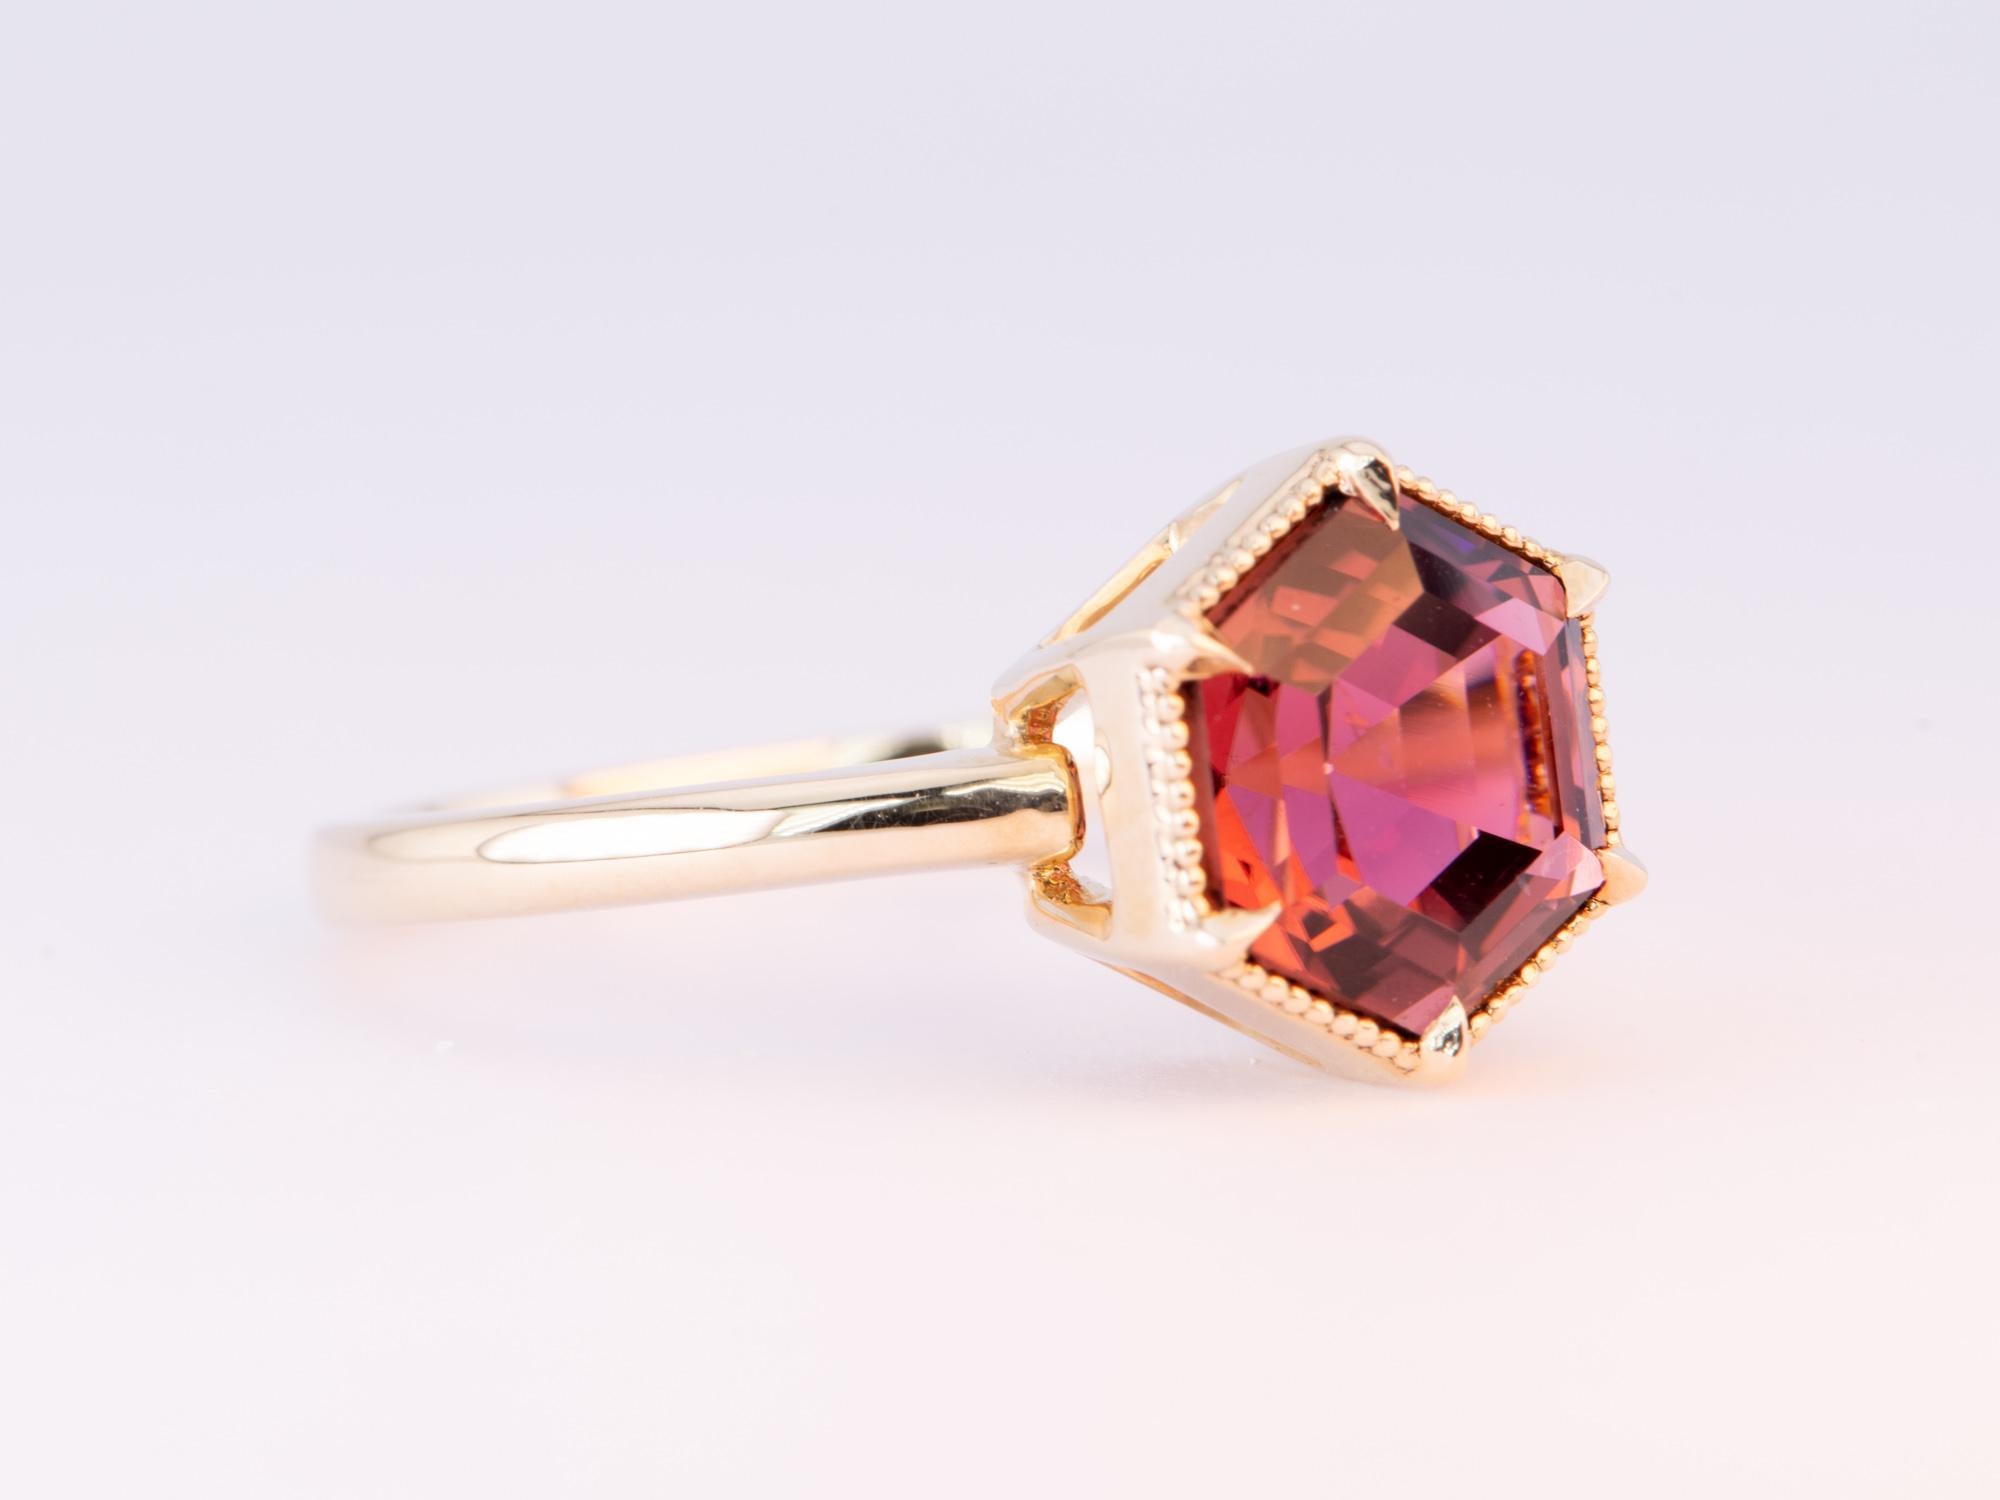 ♥ 3.12ct Hexagon Rubellite Tourmaline Engagement Ring 14K Gold
♥ The item measures 11.2mm in length, 9.7mm in width, and 7.1mm in height.
♥ Ring size: US Size 7.5 (Free resizing up or down 1 size)
♥ Material: 14K Yellow Gold
♥ Gemstone: Tourmaline,